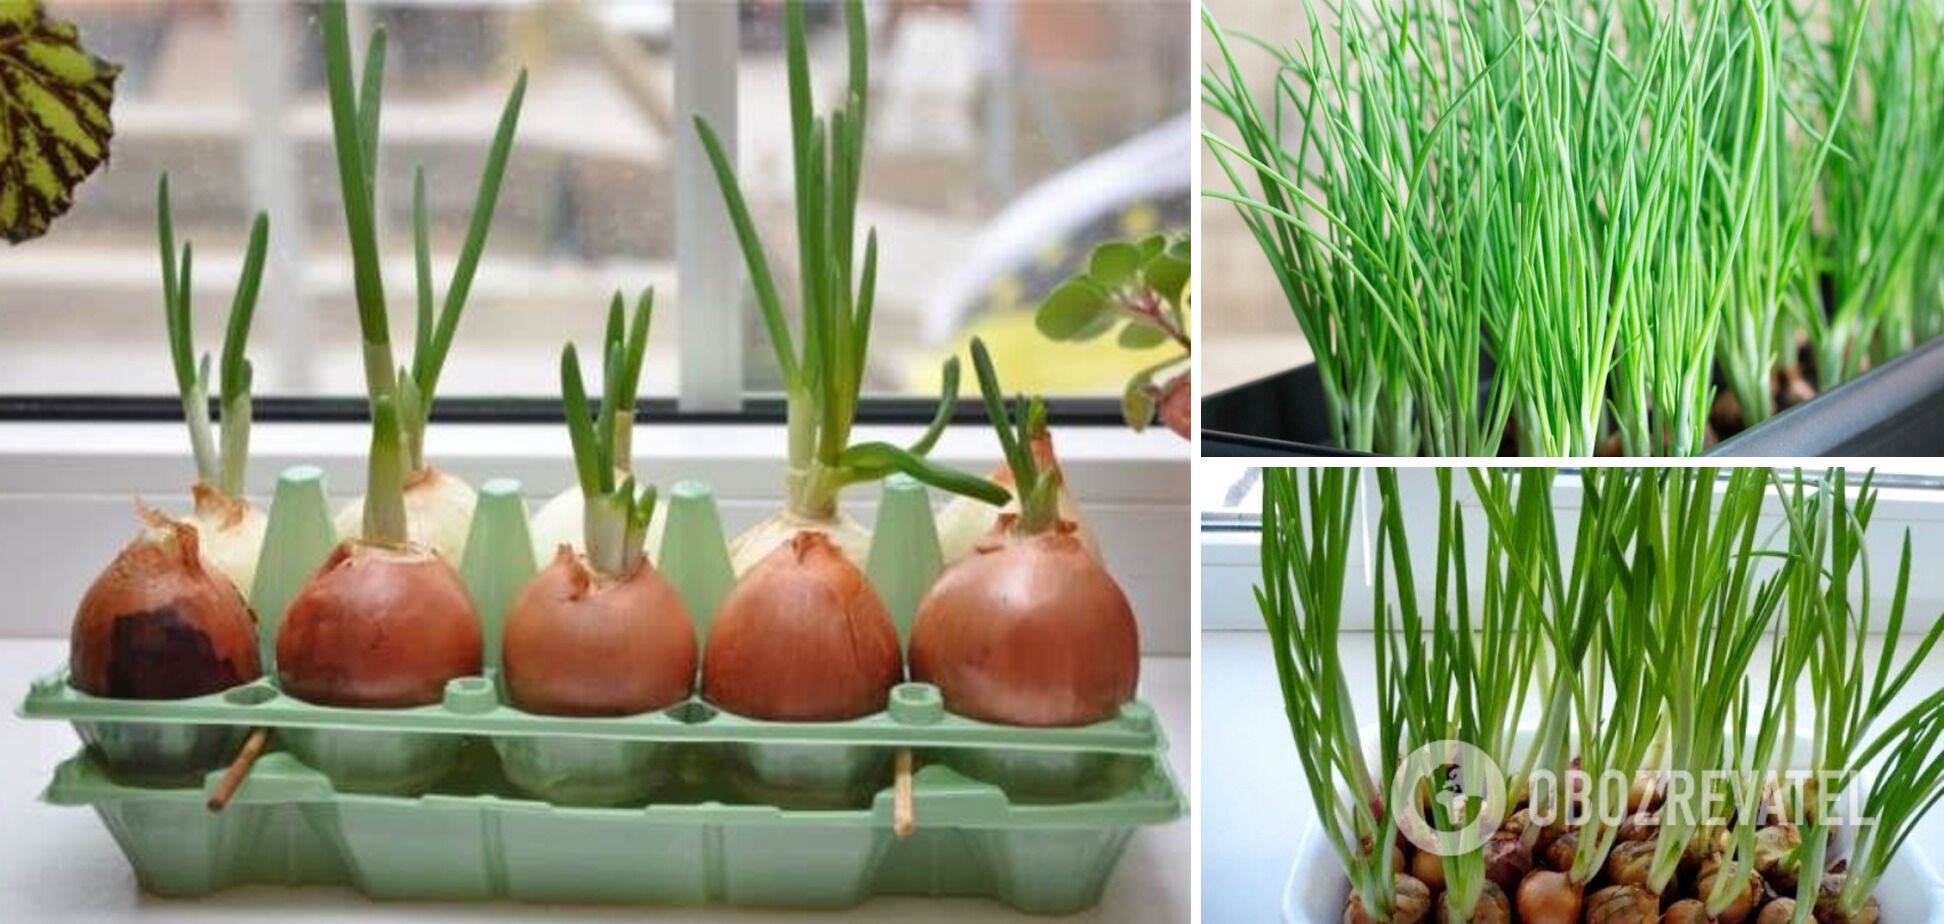 How to grow green onions in winter on the windowsill so they don't get bitter